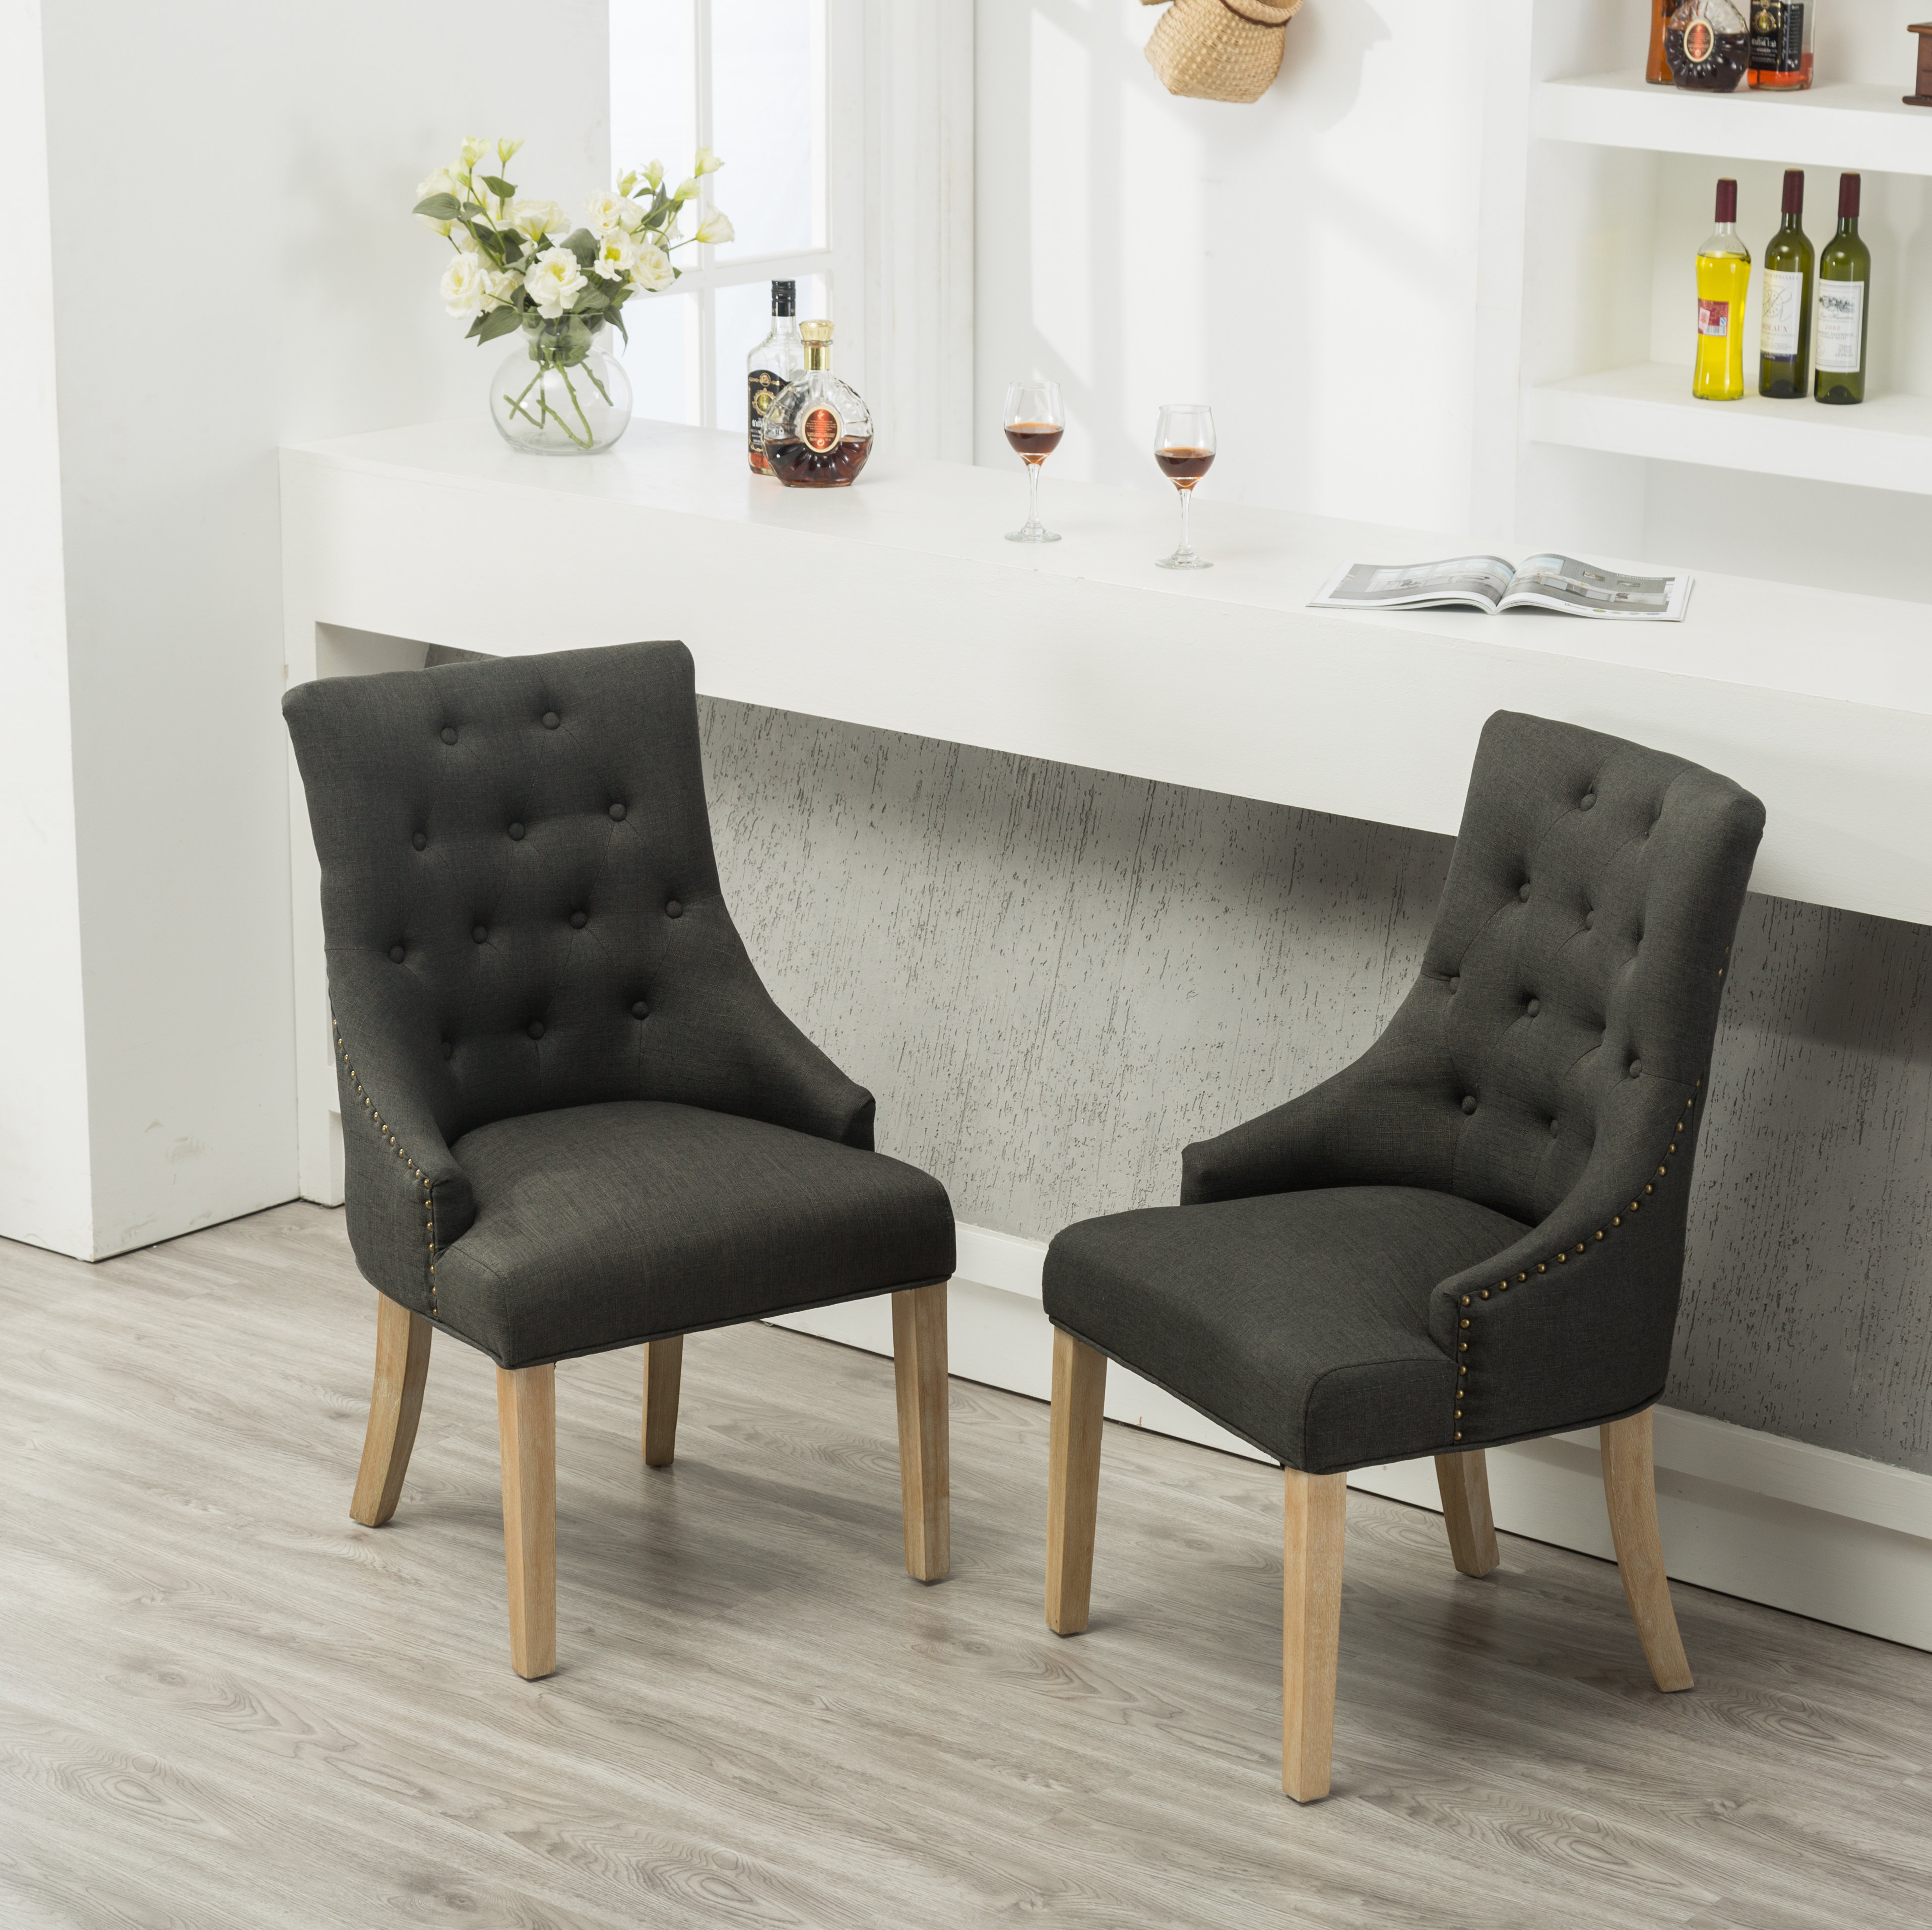 Tufted Dining Chairs Free Shipping Over 35 Wayfair